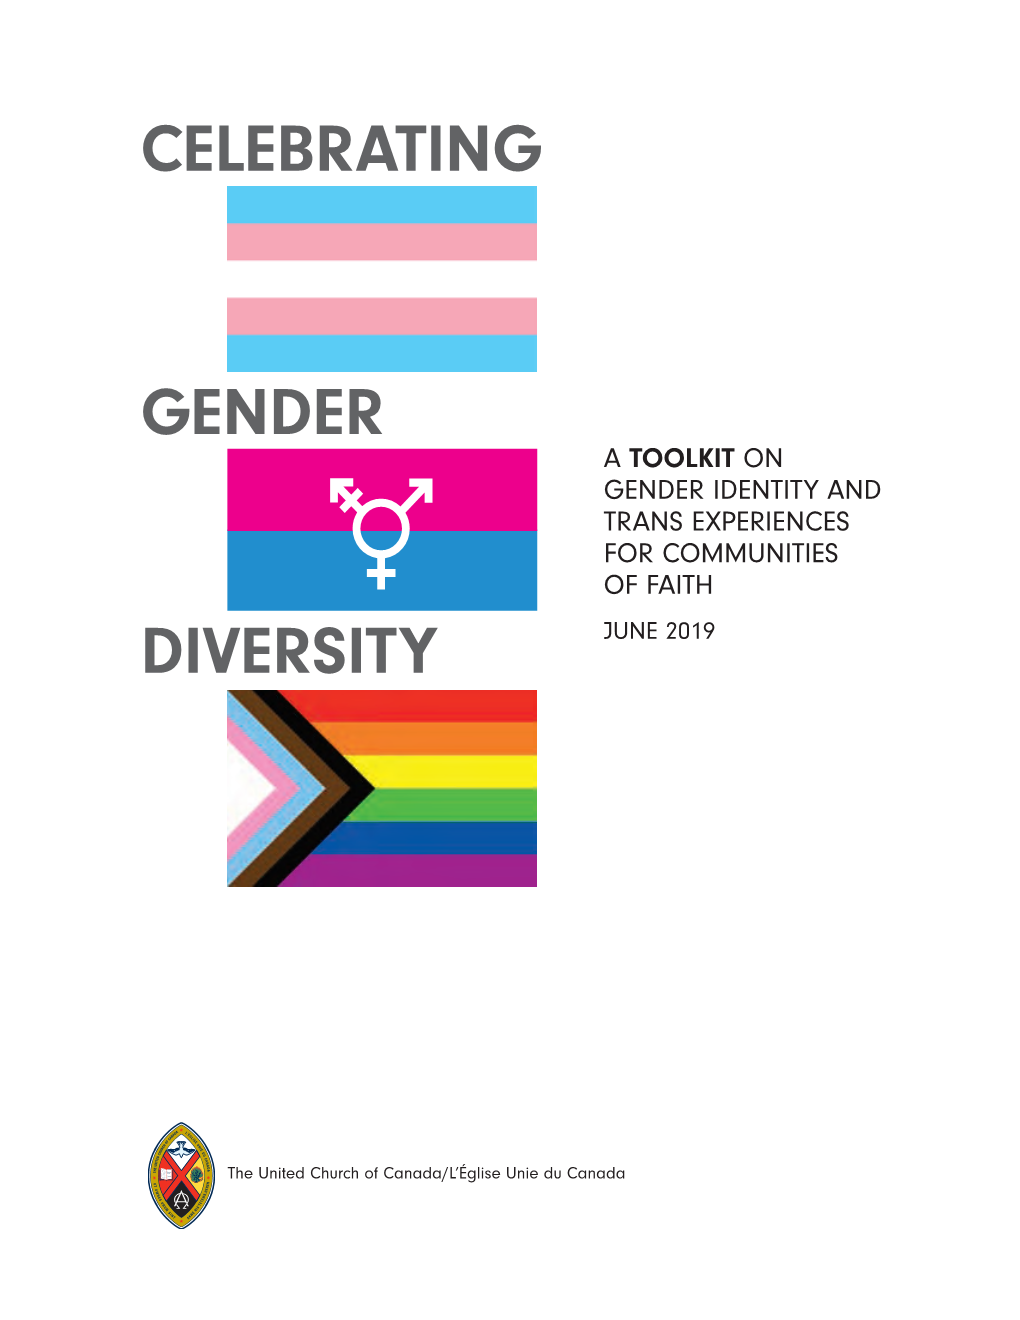 Celebrating Gender Diversity a Toolkit on Gender Identity and Trans Experiences for Communities of Faith (June 2019)